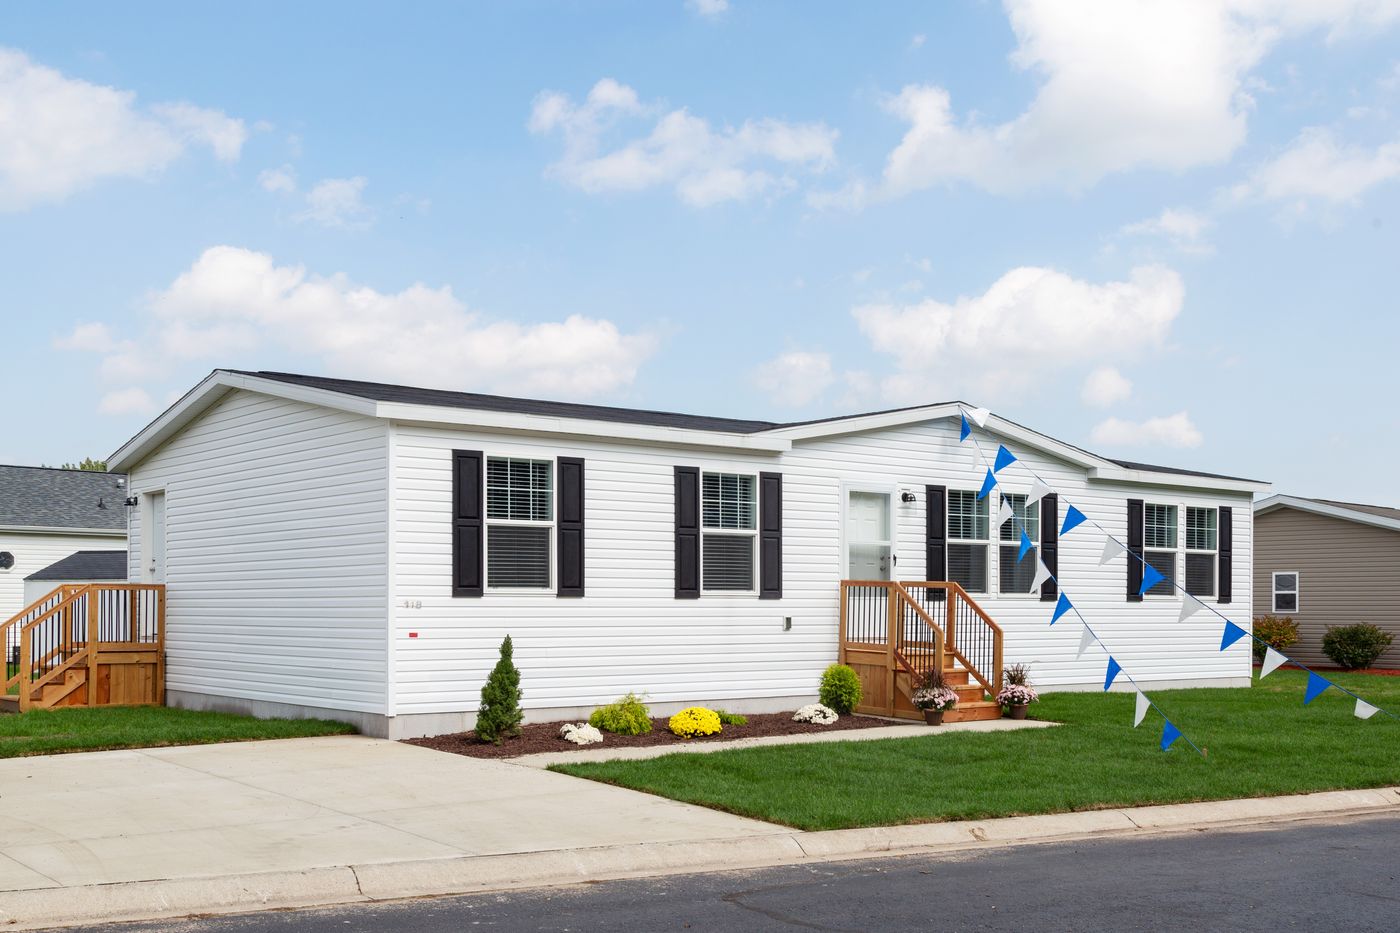 The SOMERSET DR 5228-MS012 SECT Exterior. This Manufactured Mobile Home features 3 bedrooms and 2 baths.